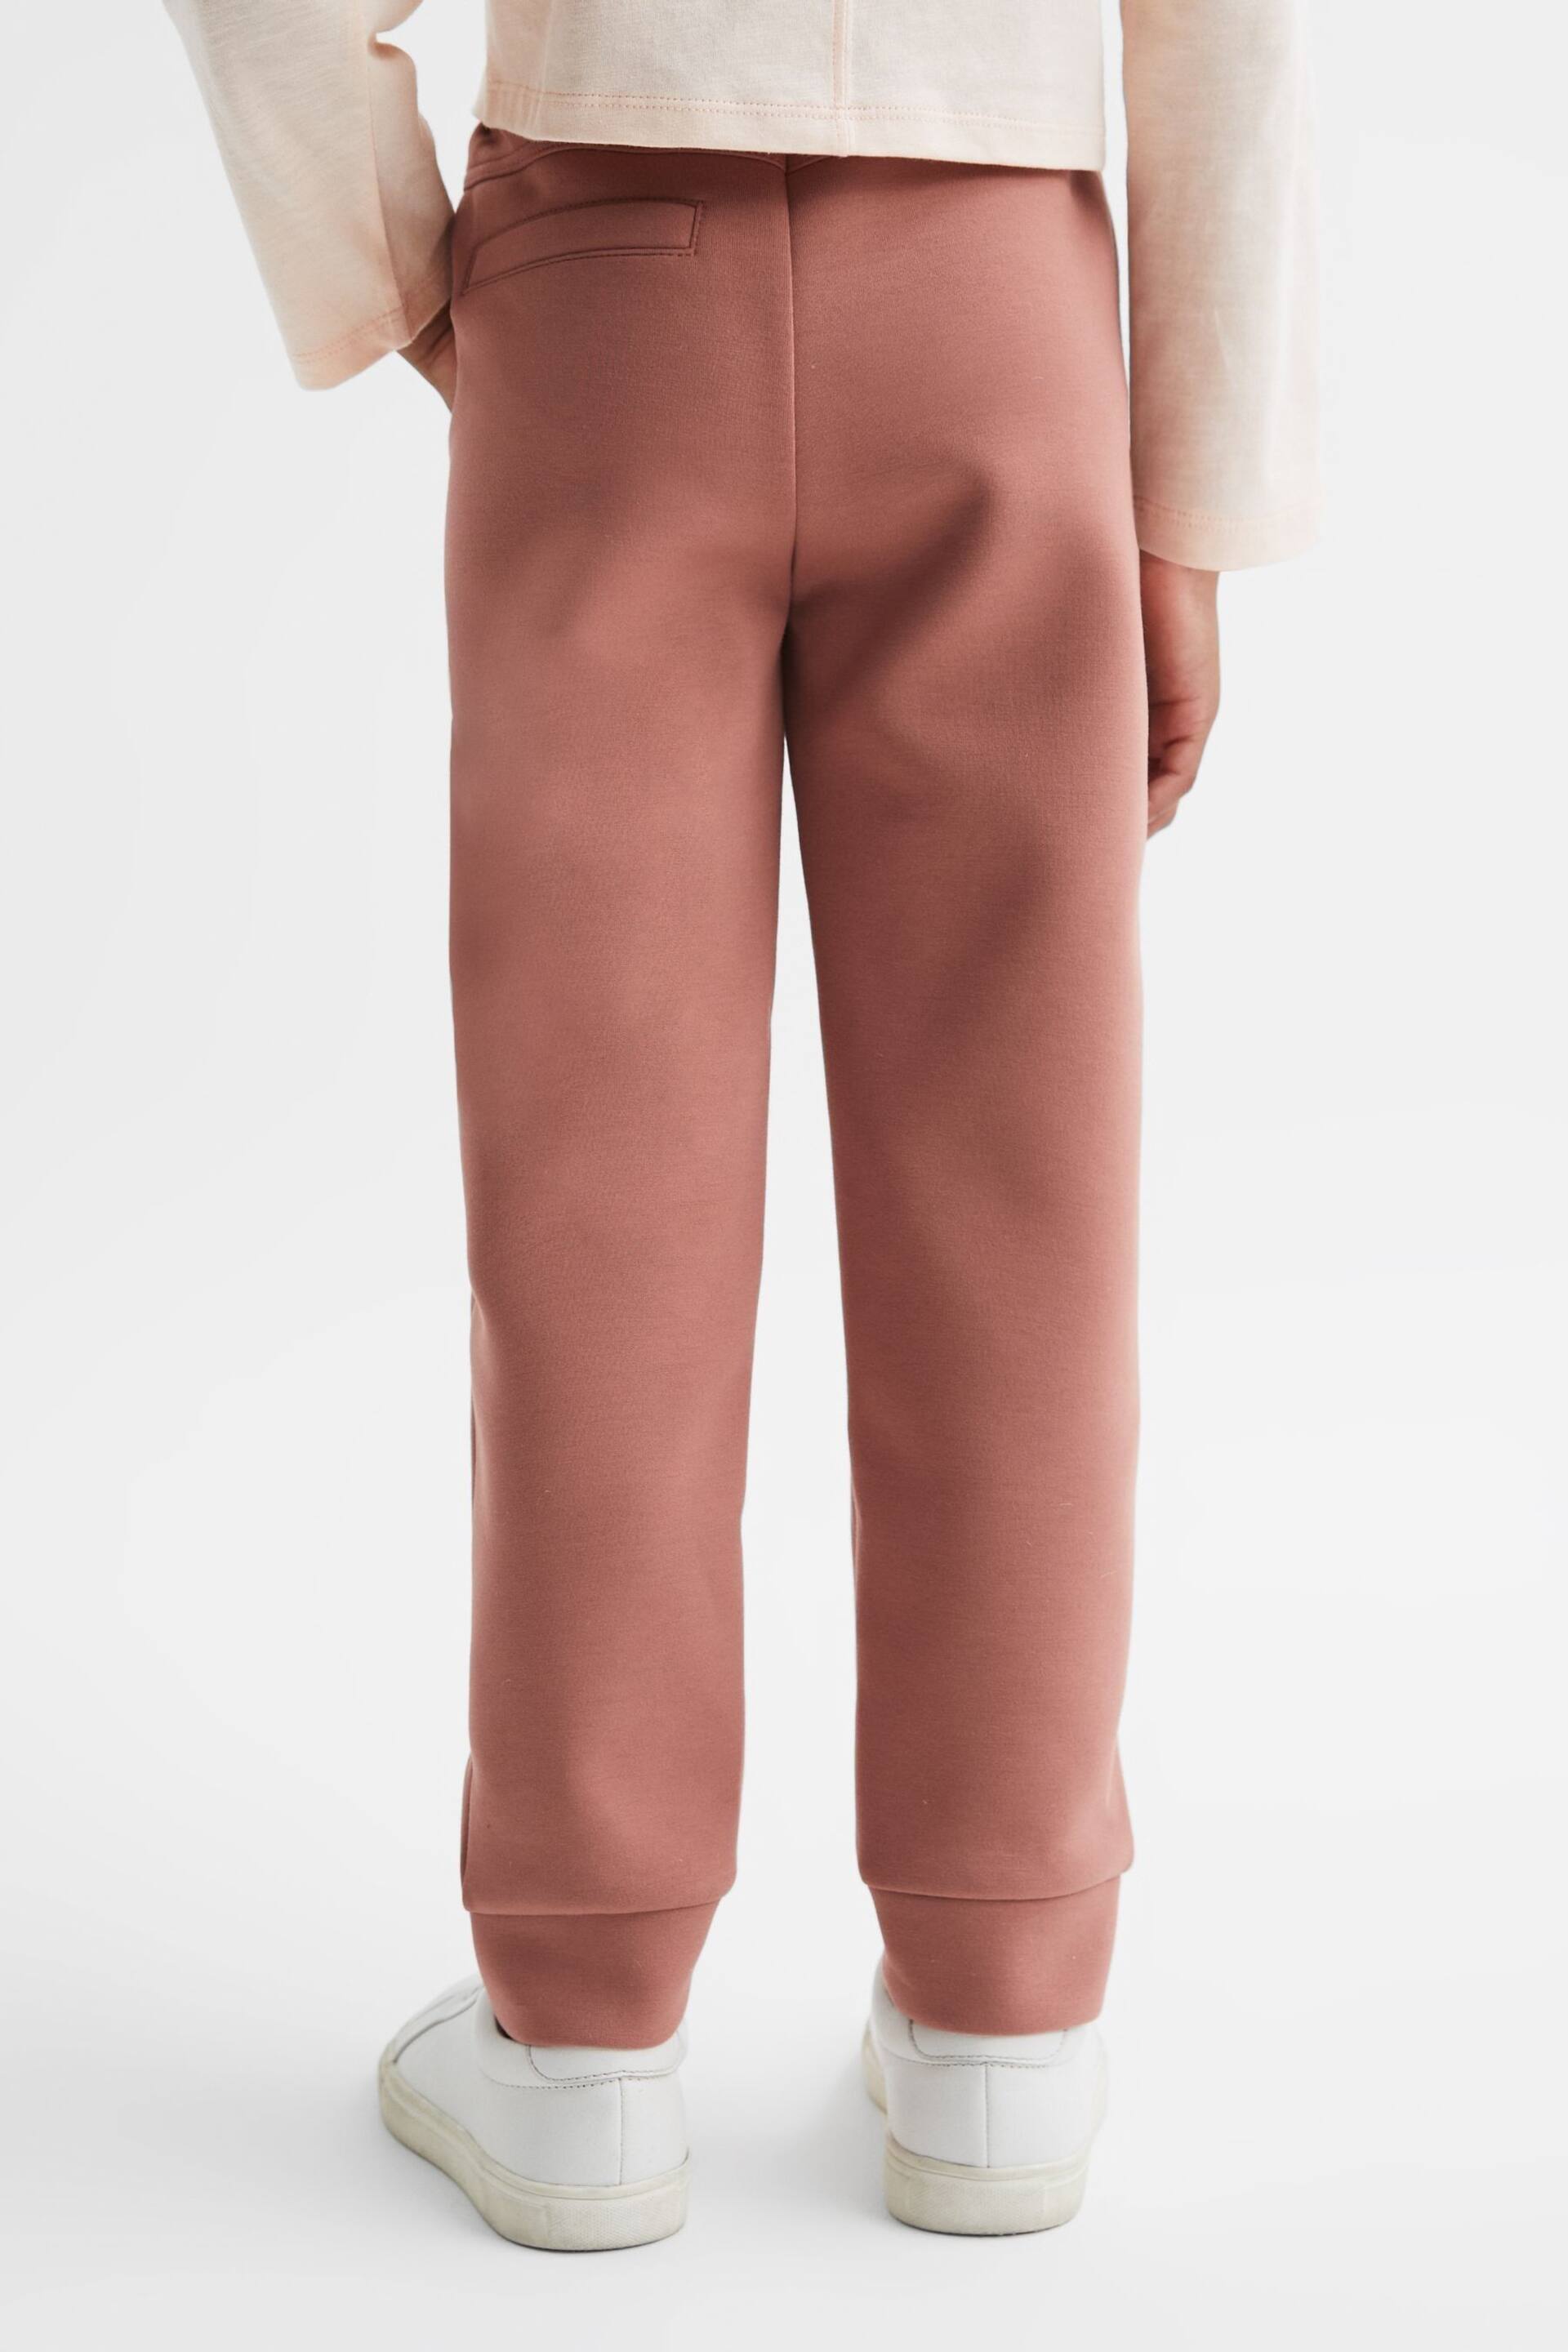 Reiss Mink Seren Senior High Rise Elasticated Jersey Trousers - Image 5 of 6